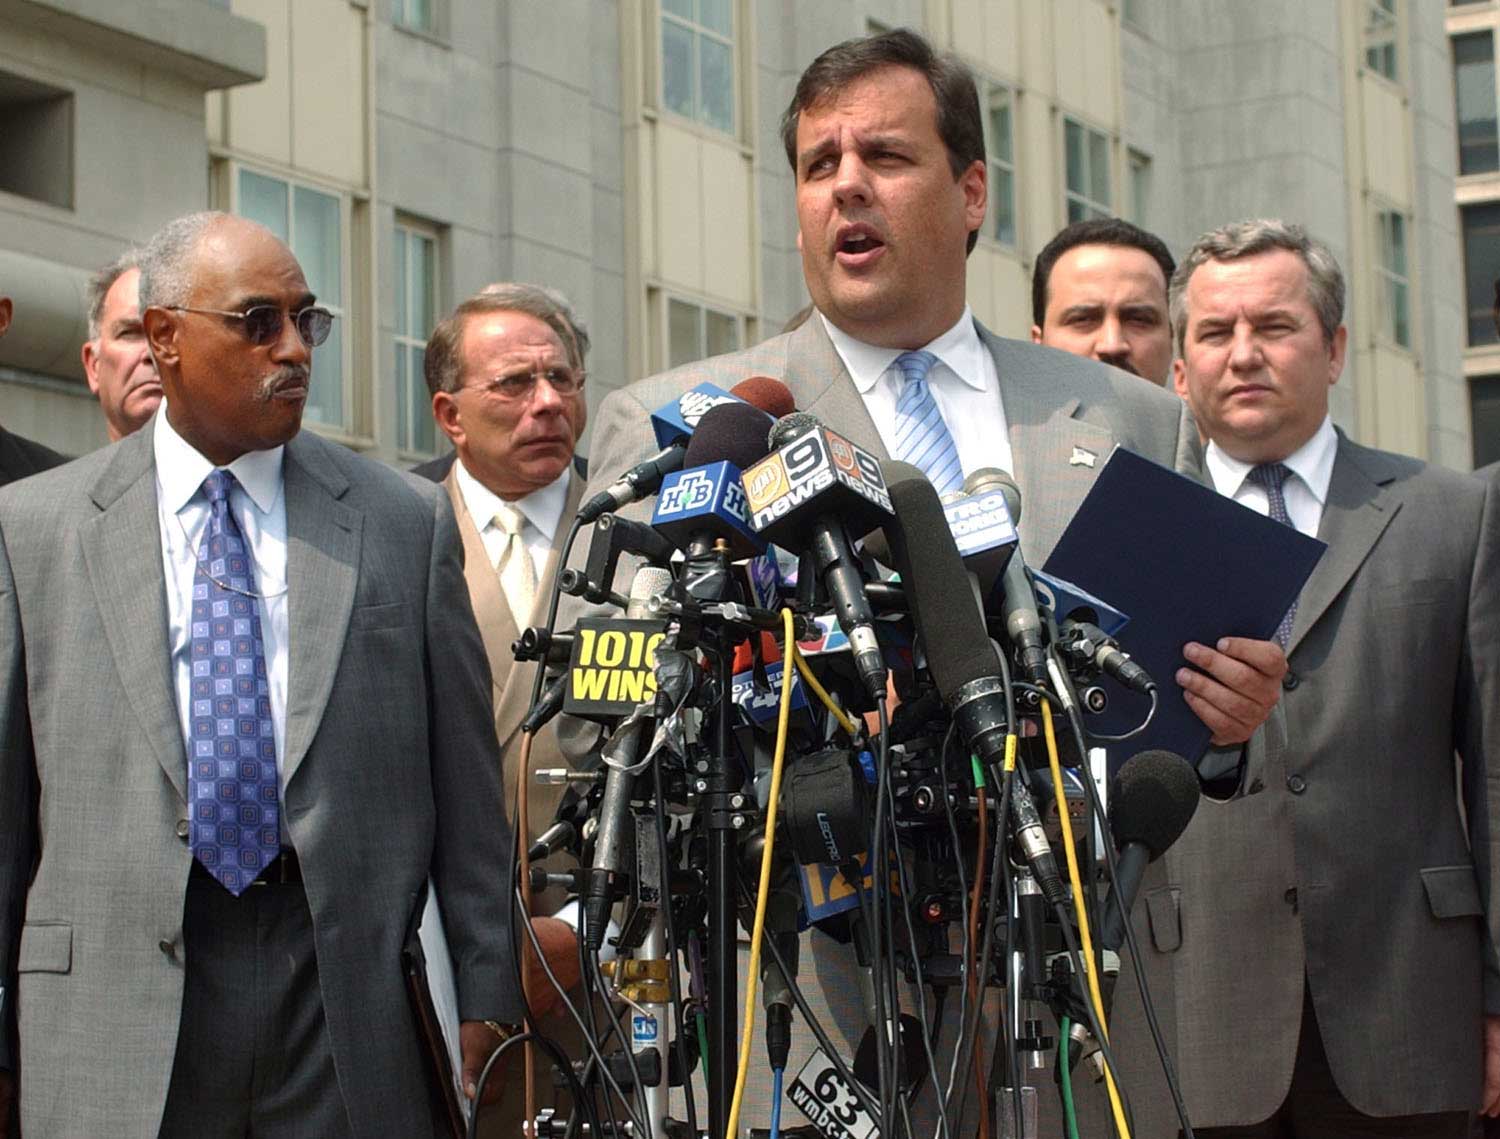 Chris Christie, center, answers a question on the steps of U.S. District Courthouse in Newark, N.J. on Aug. 13, 2003.